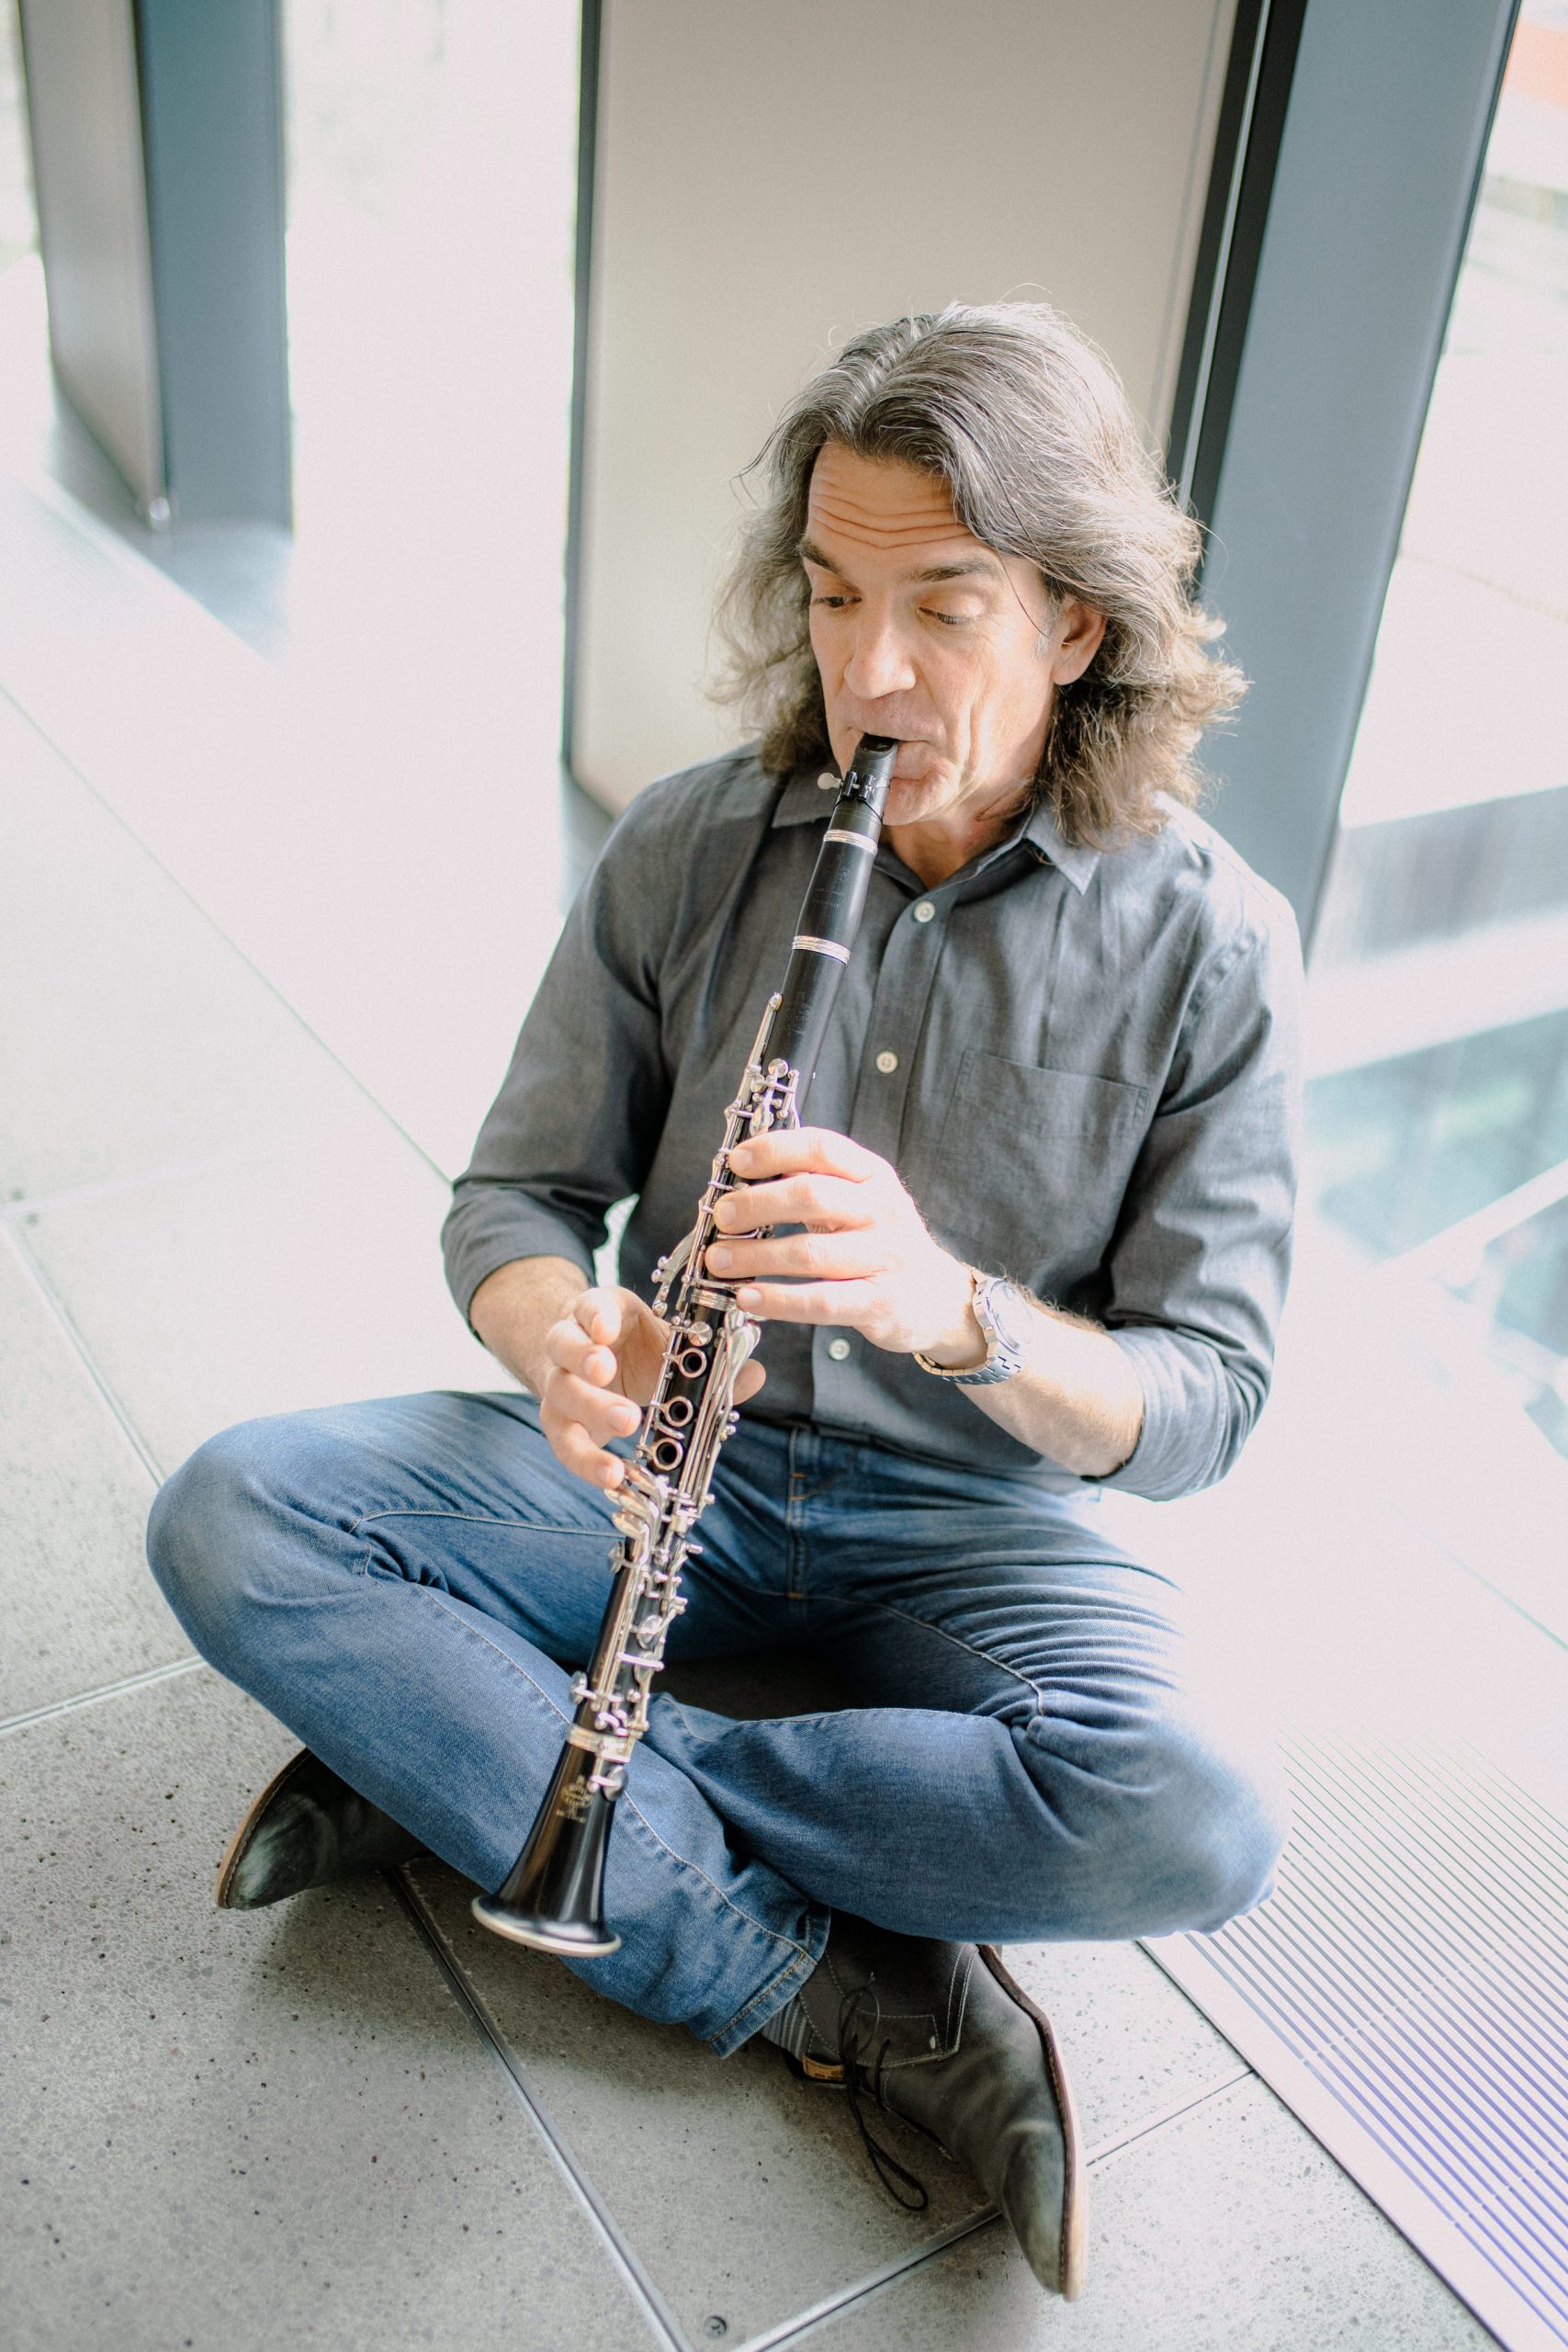 To play the new quarter-tone extended clarinet, Greg Oakes went back to basics and created new practice techniques for himself.